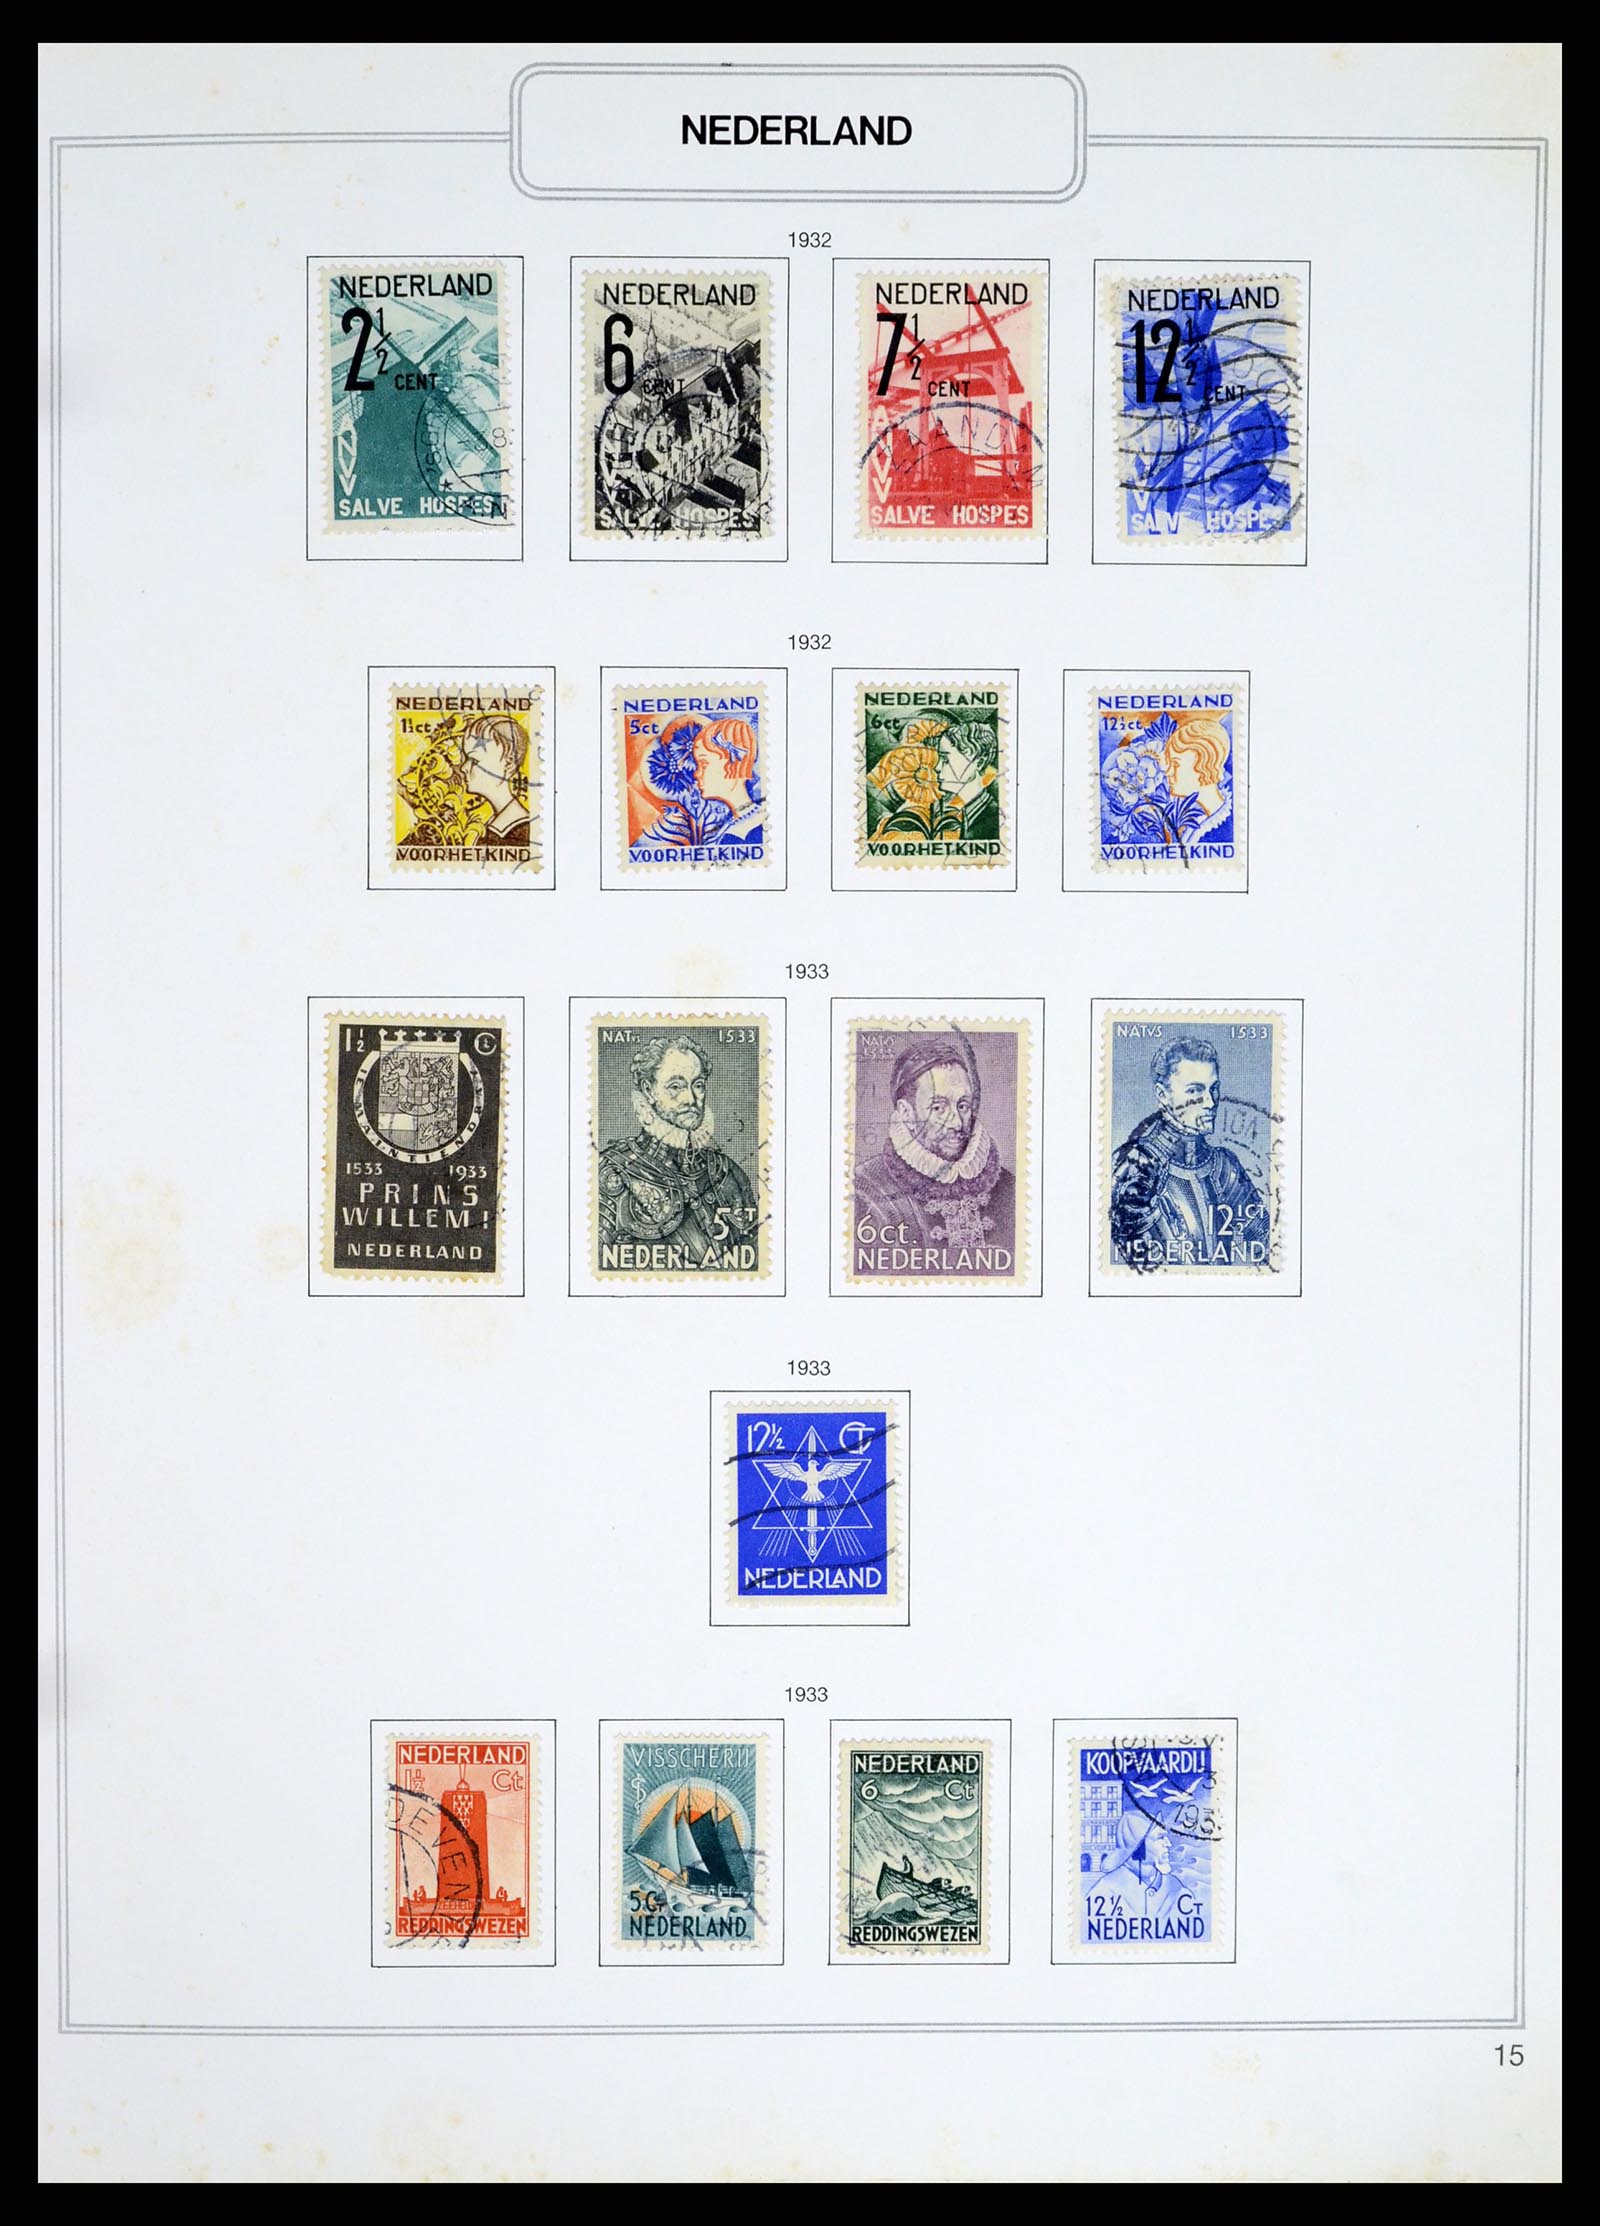 37348 015 - Stamp collection 37348 Netherlands 1852-1995.